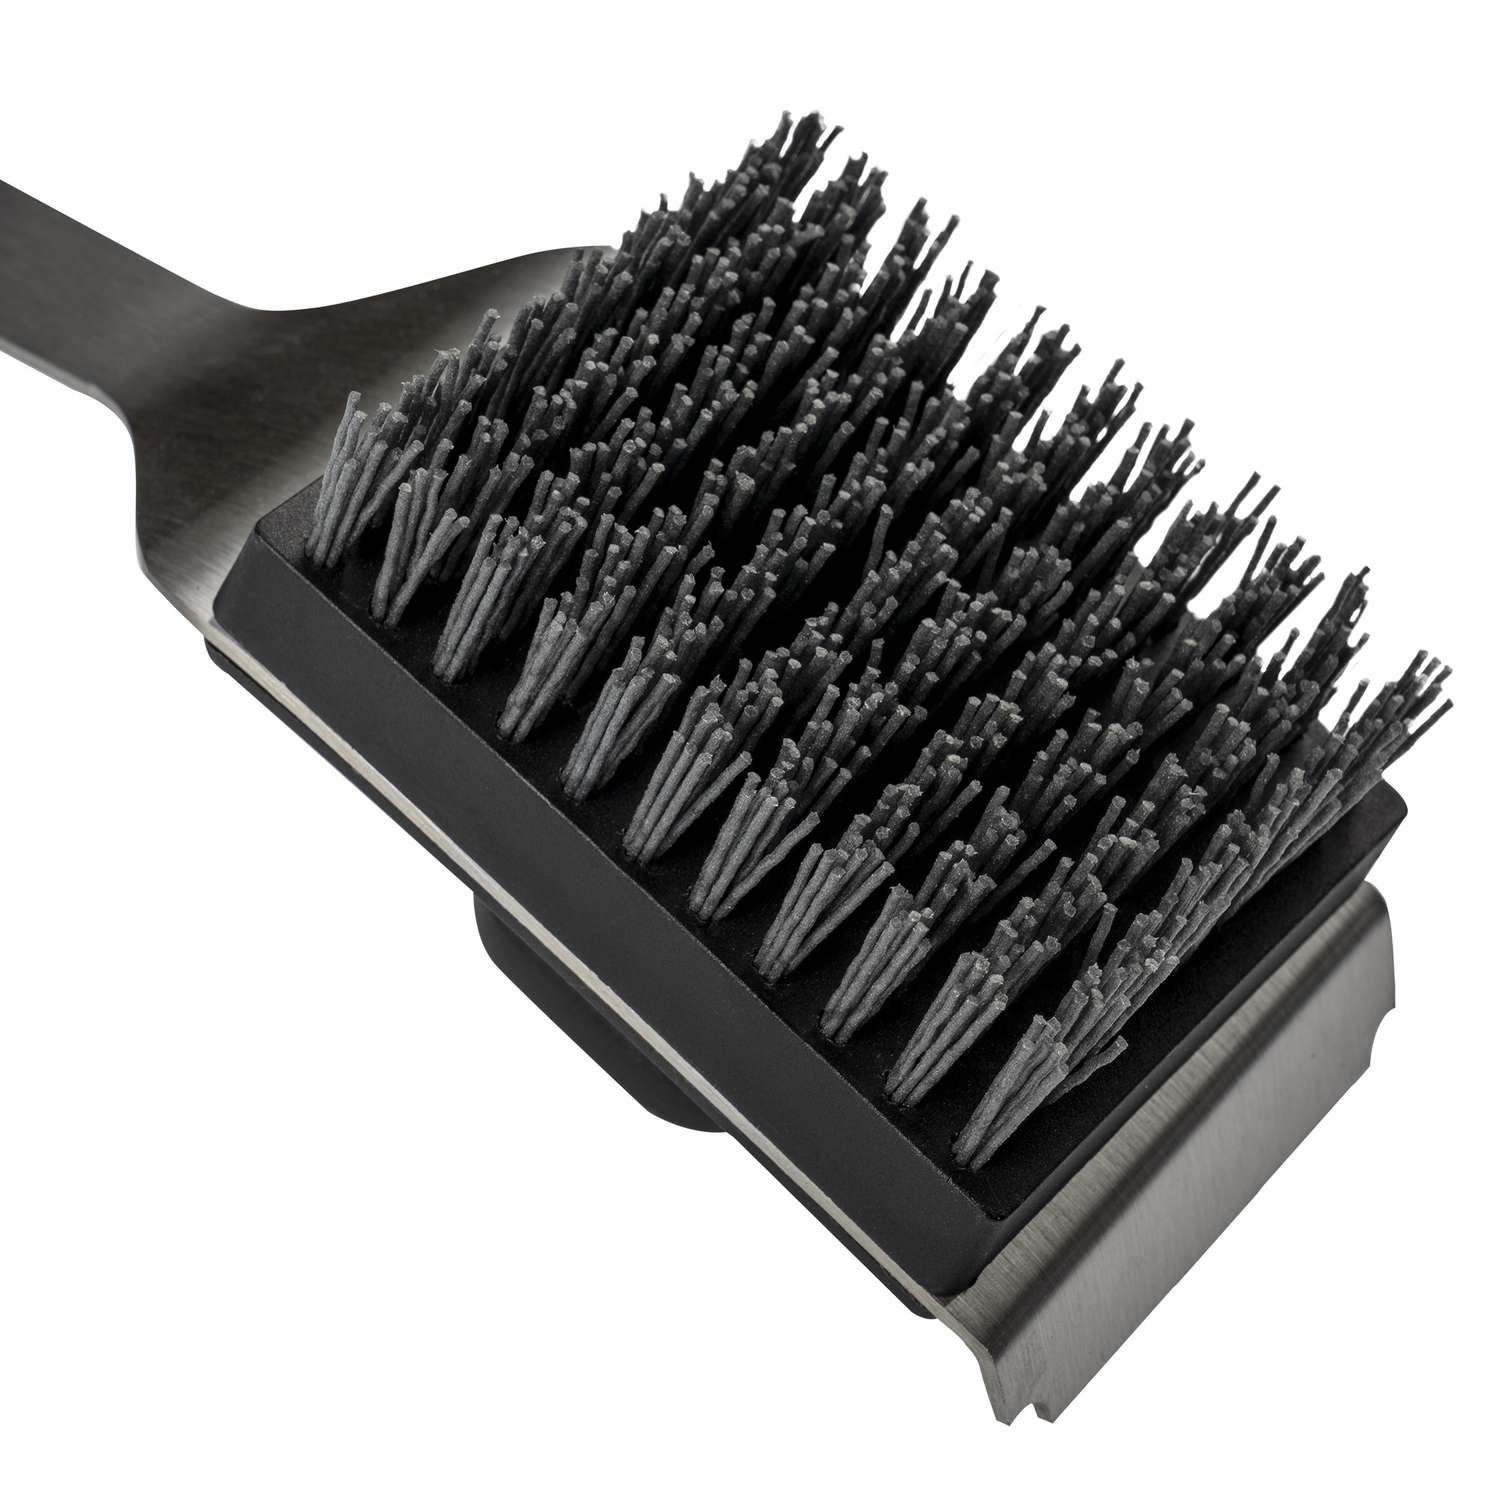 Flame King Rechargeable Electric Grill Brush